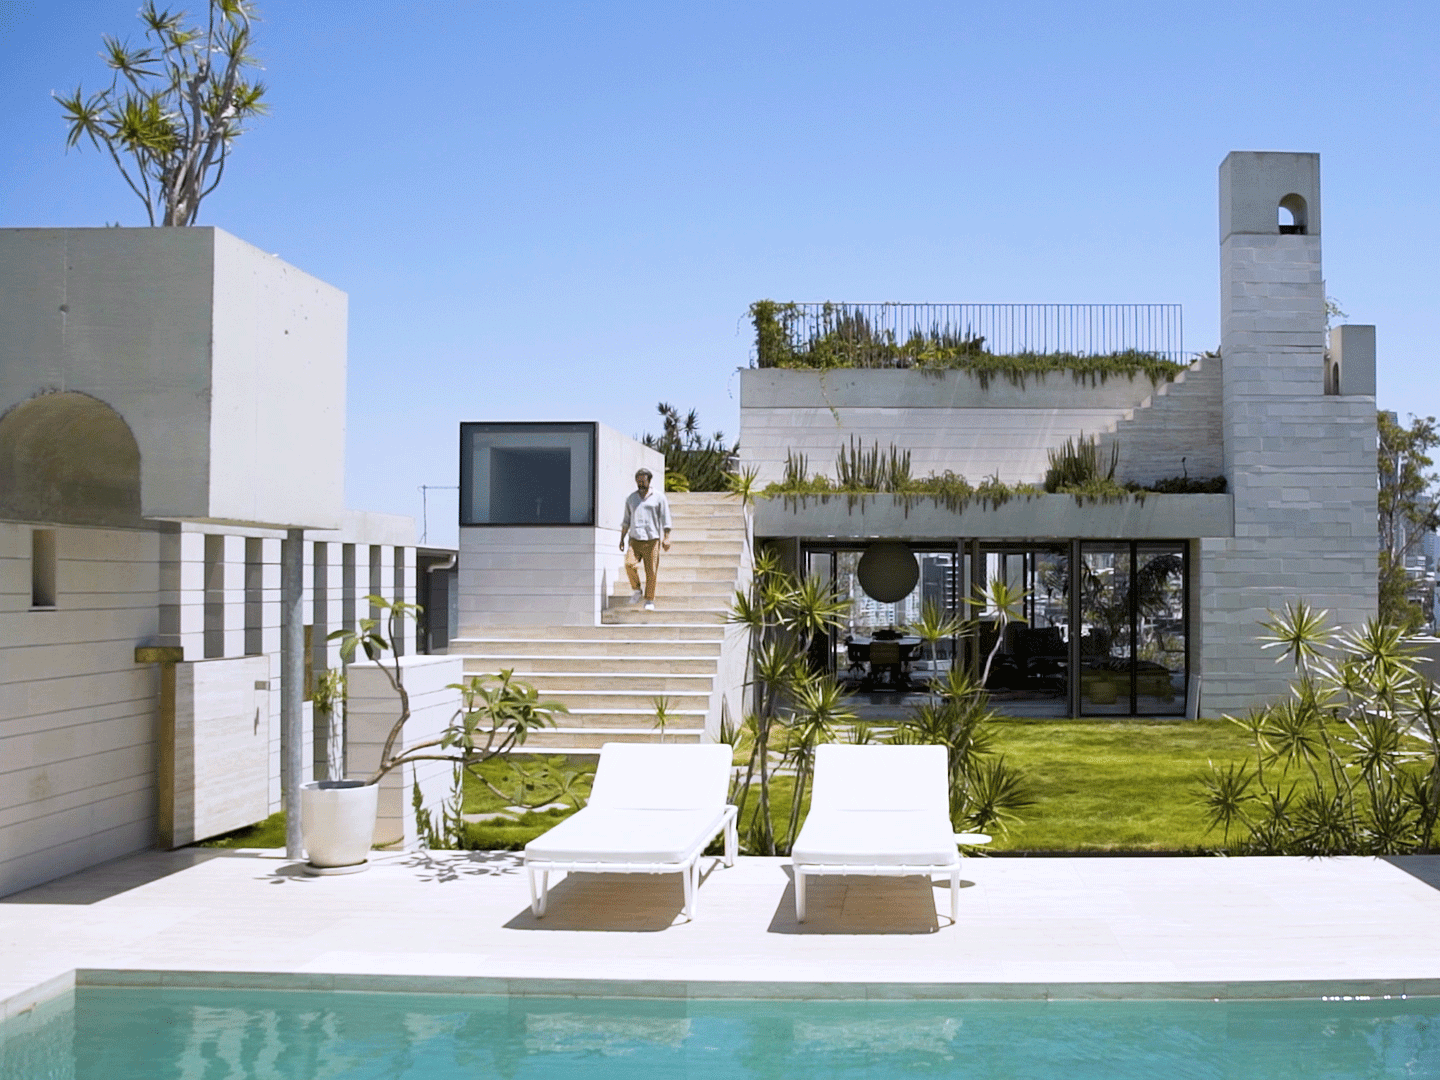 La Scala residence by Richards and Spence